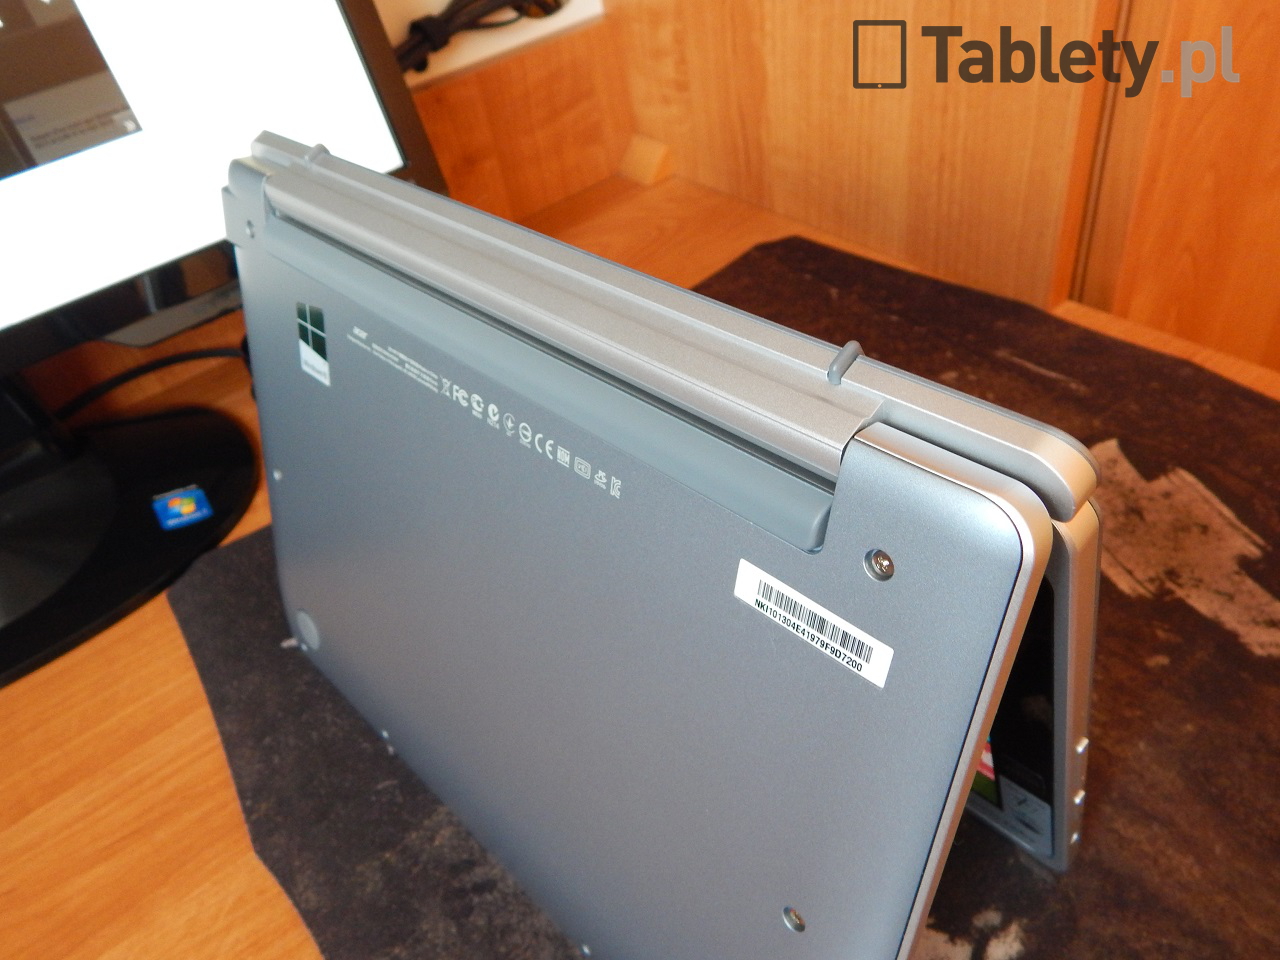 Acer Aspire Switch 10 25